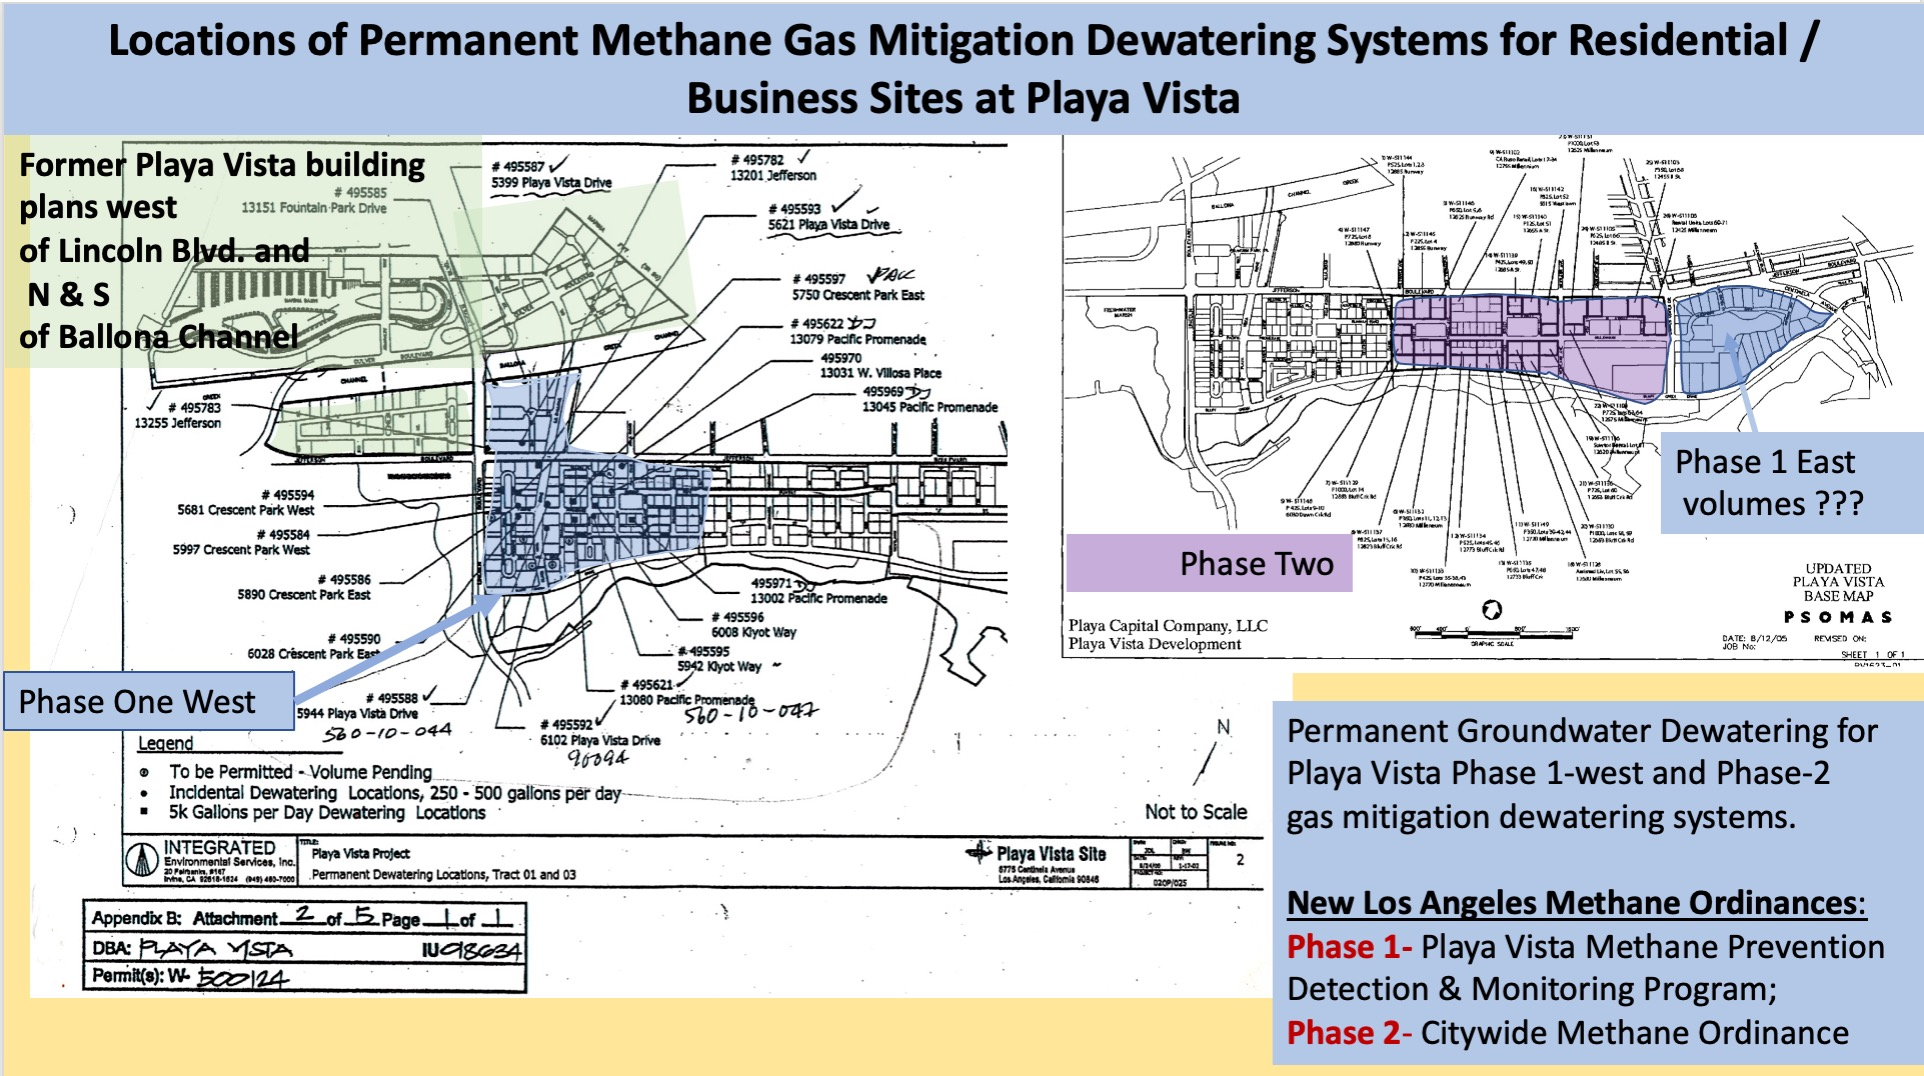 Spider_Maps-Locations_of_Permanent_Methane_Gas_Dewater_System